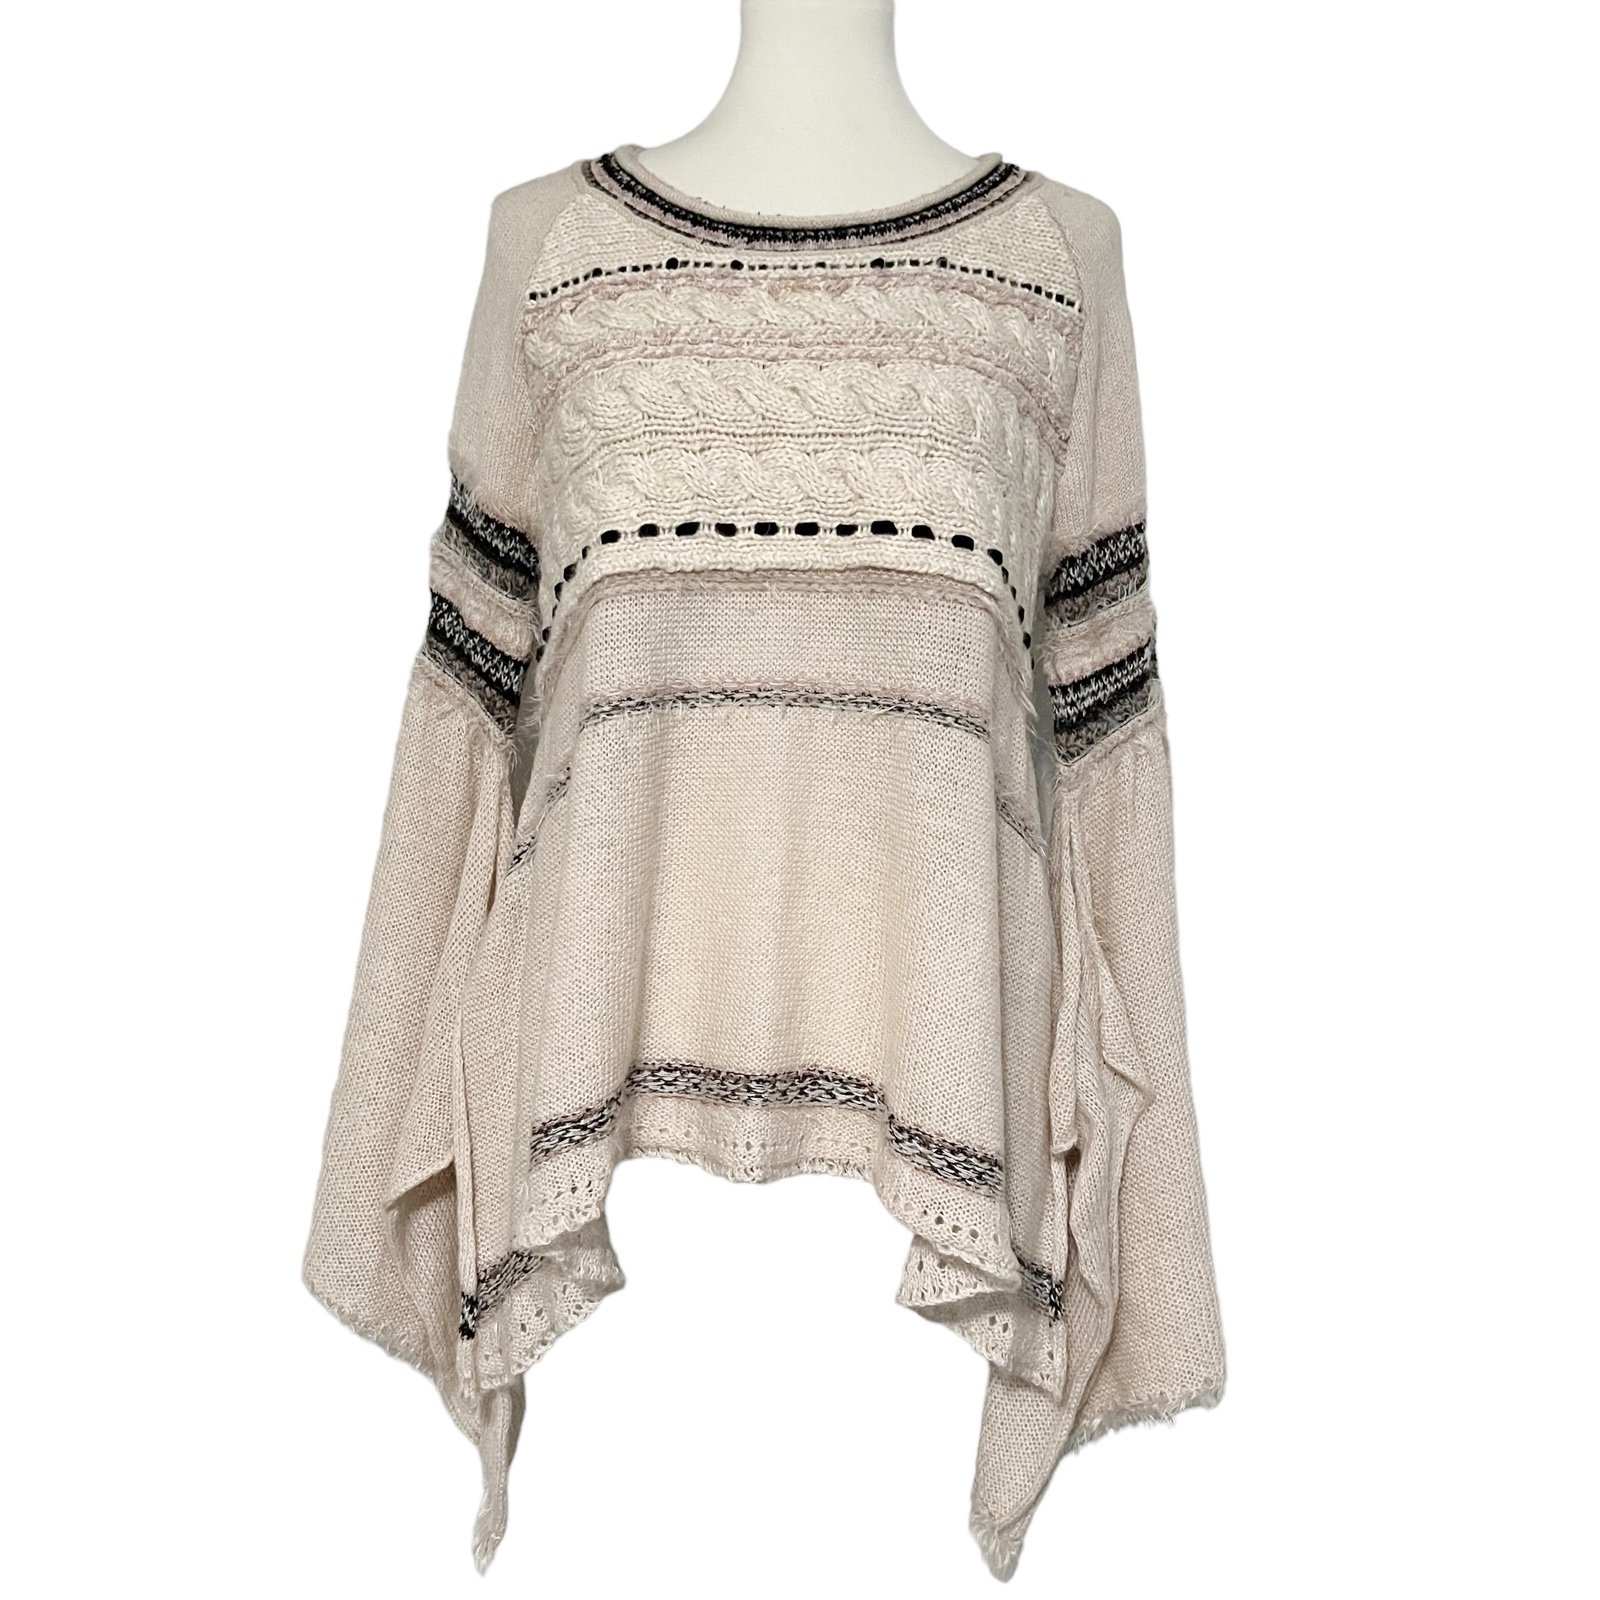 Exclusive Free People Craft Time Bell Sleeve Knit Ivory Sweater LJib6Ckh2 Factory Price